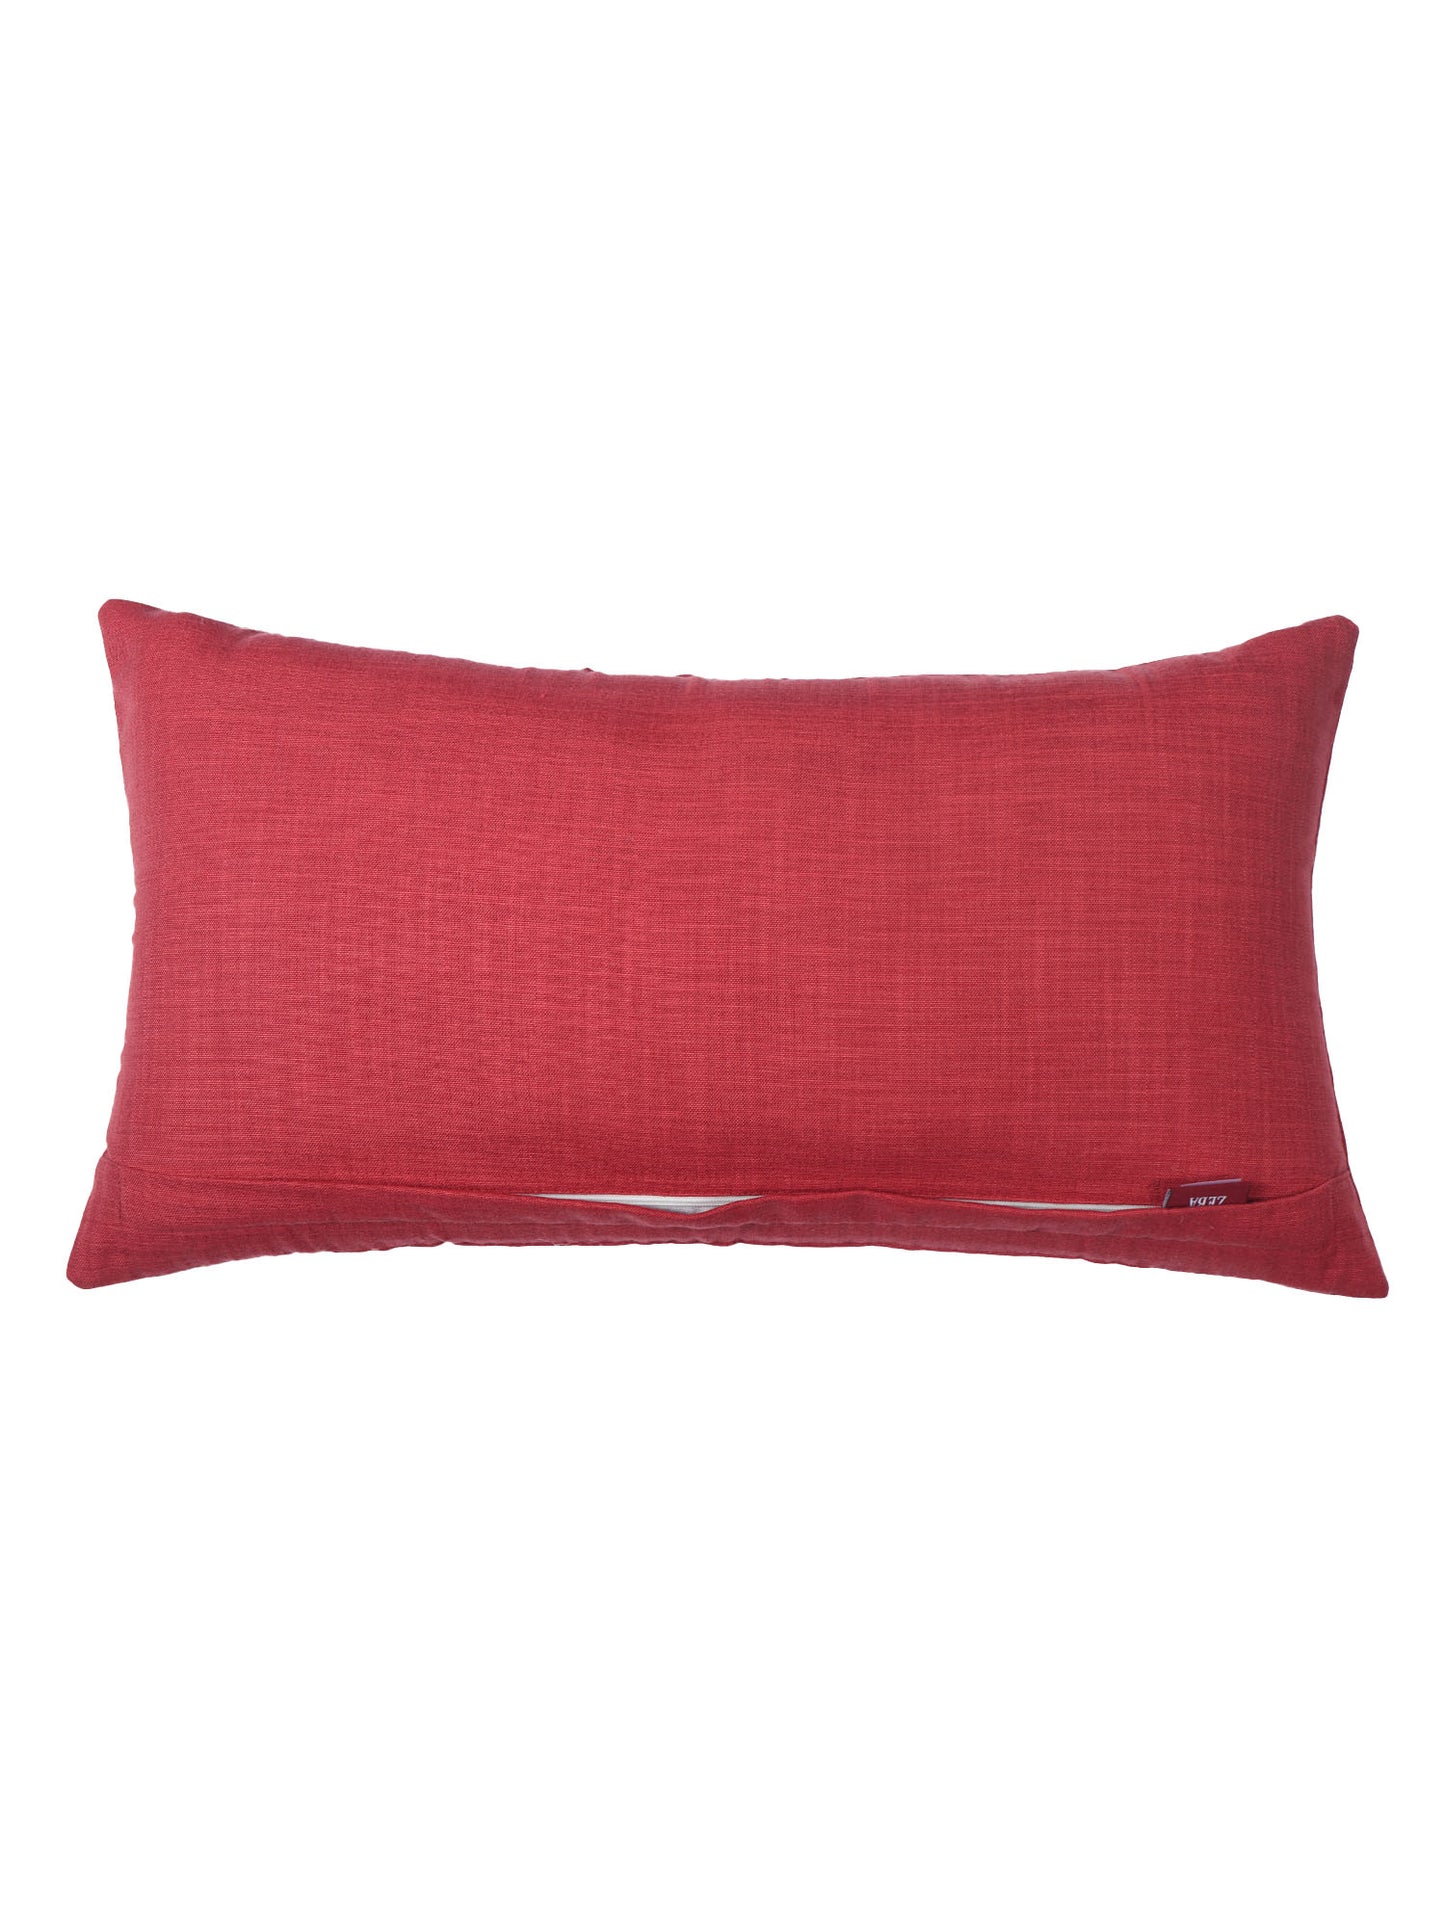 ZEBA World Rectangular Cushion Cover for Sofa - Lumbar Cushion | Hand Embroidery(Chawal Taka) with Quilting Embroidery - Cotton Blend | Red - 12x22in(30x55cm) (Pack of 1)